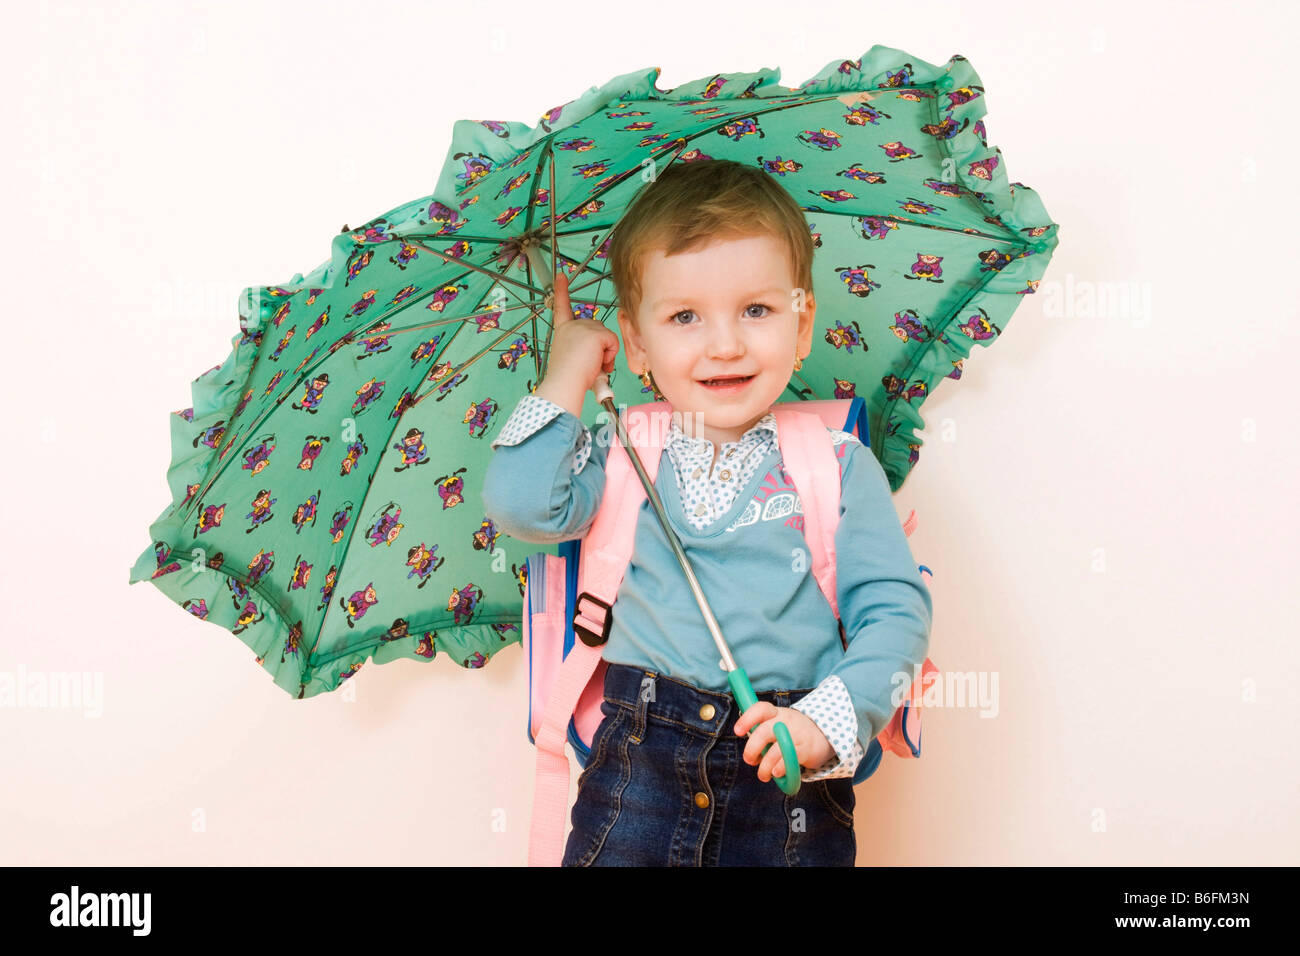 Little girl, 3 years, with umbrella and schoolbag Stock Photo